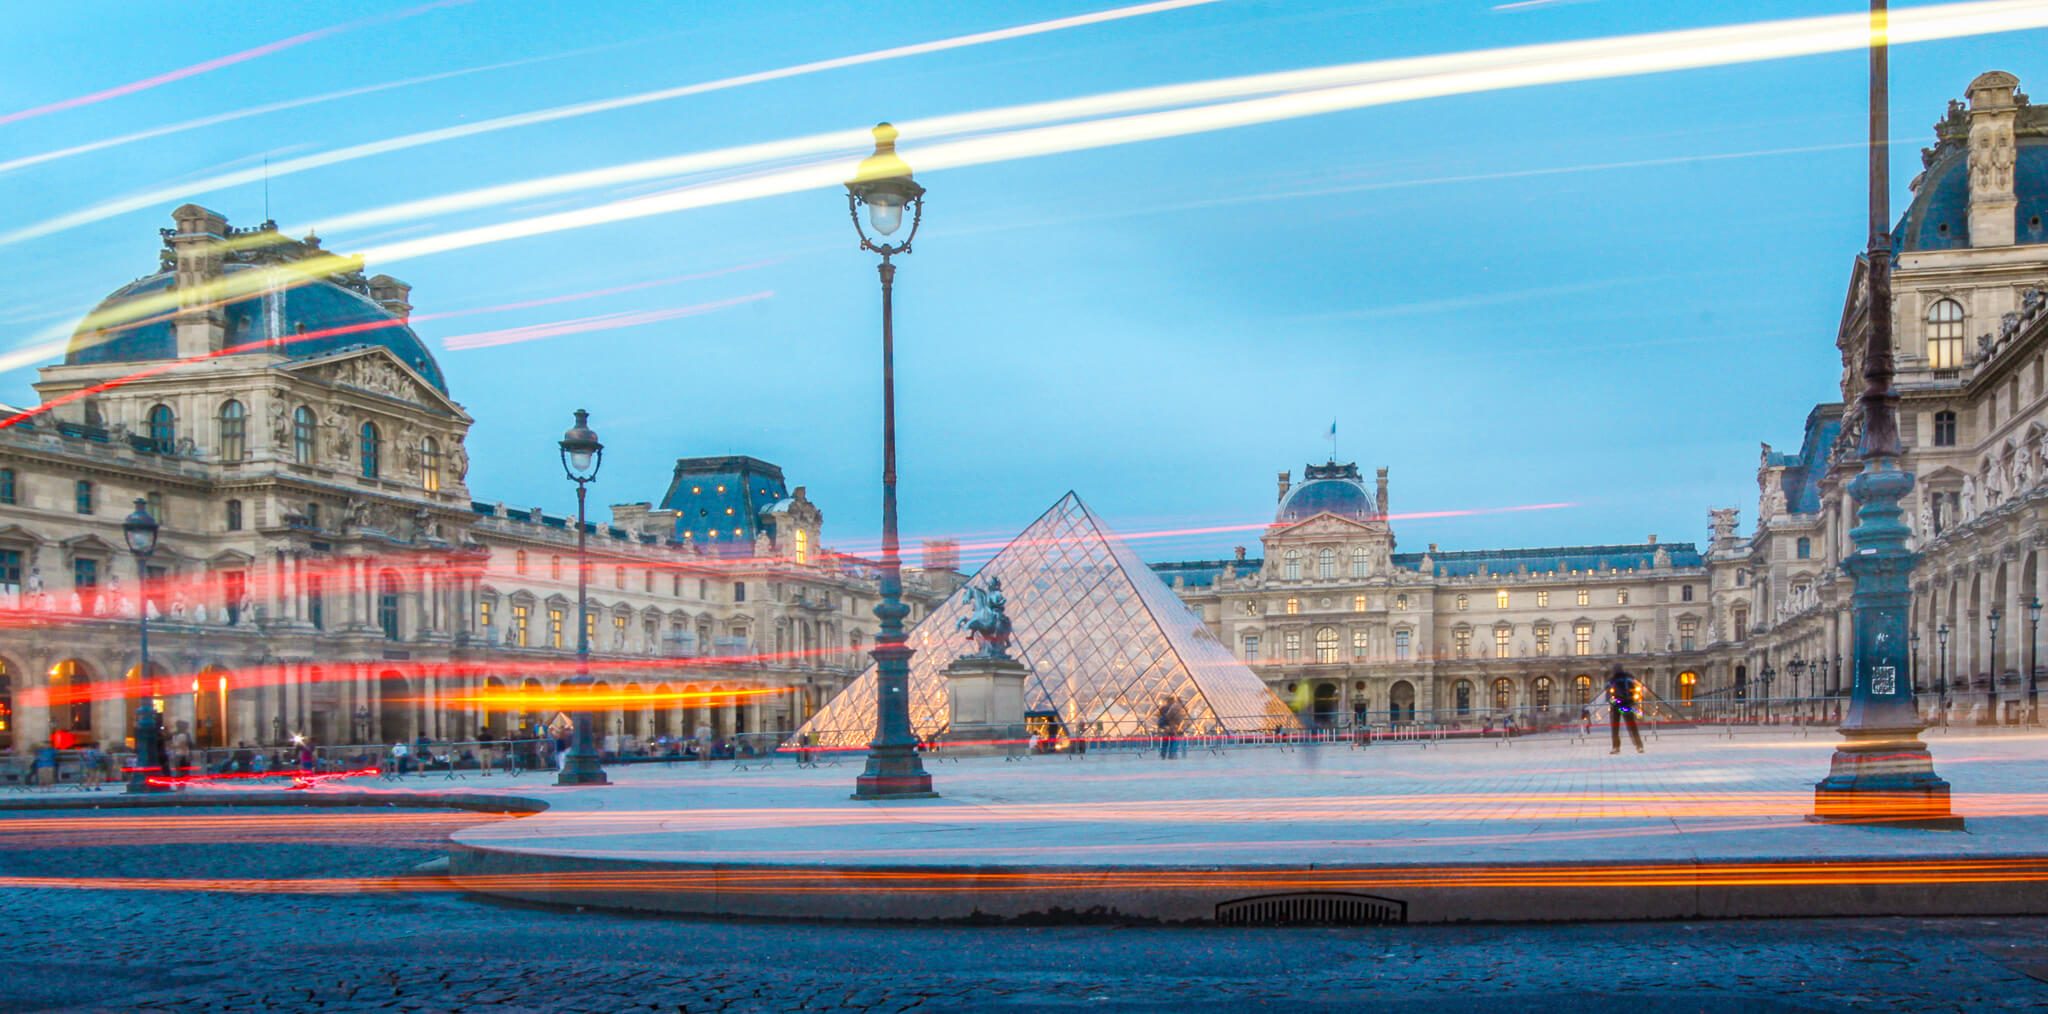 The Louvre and its glass pyramid